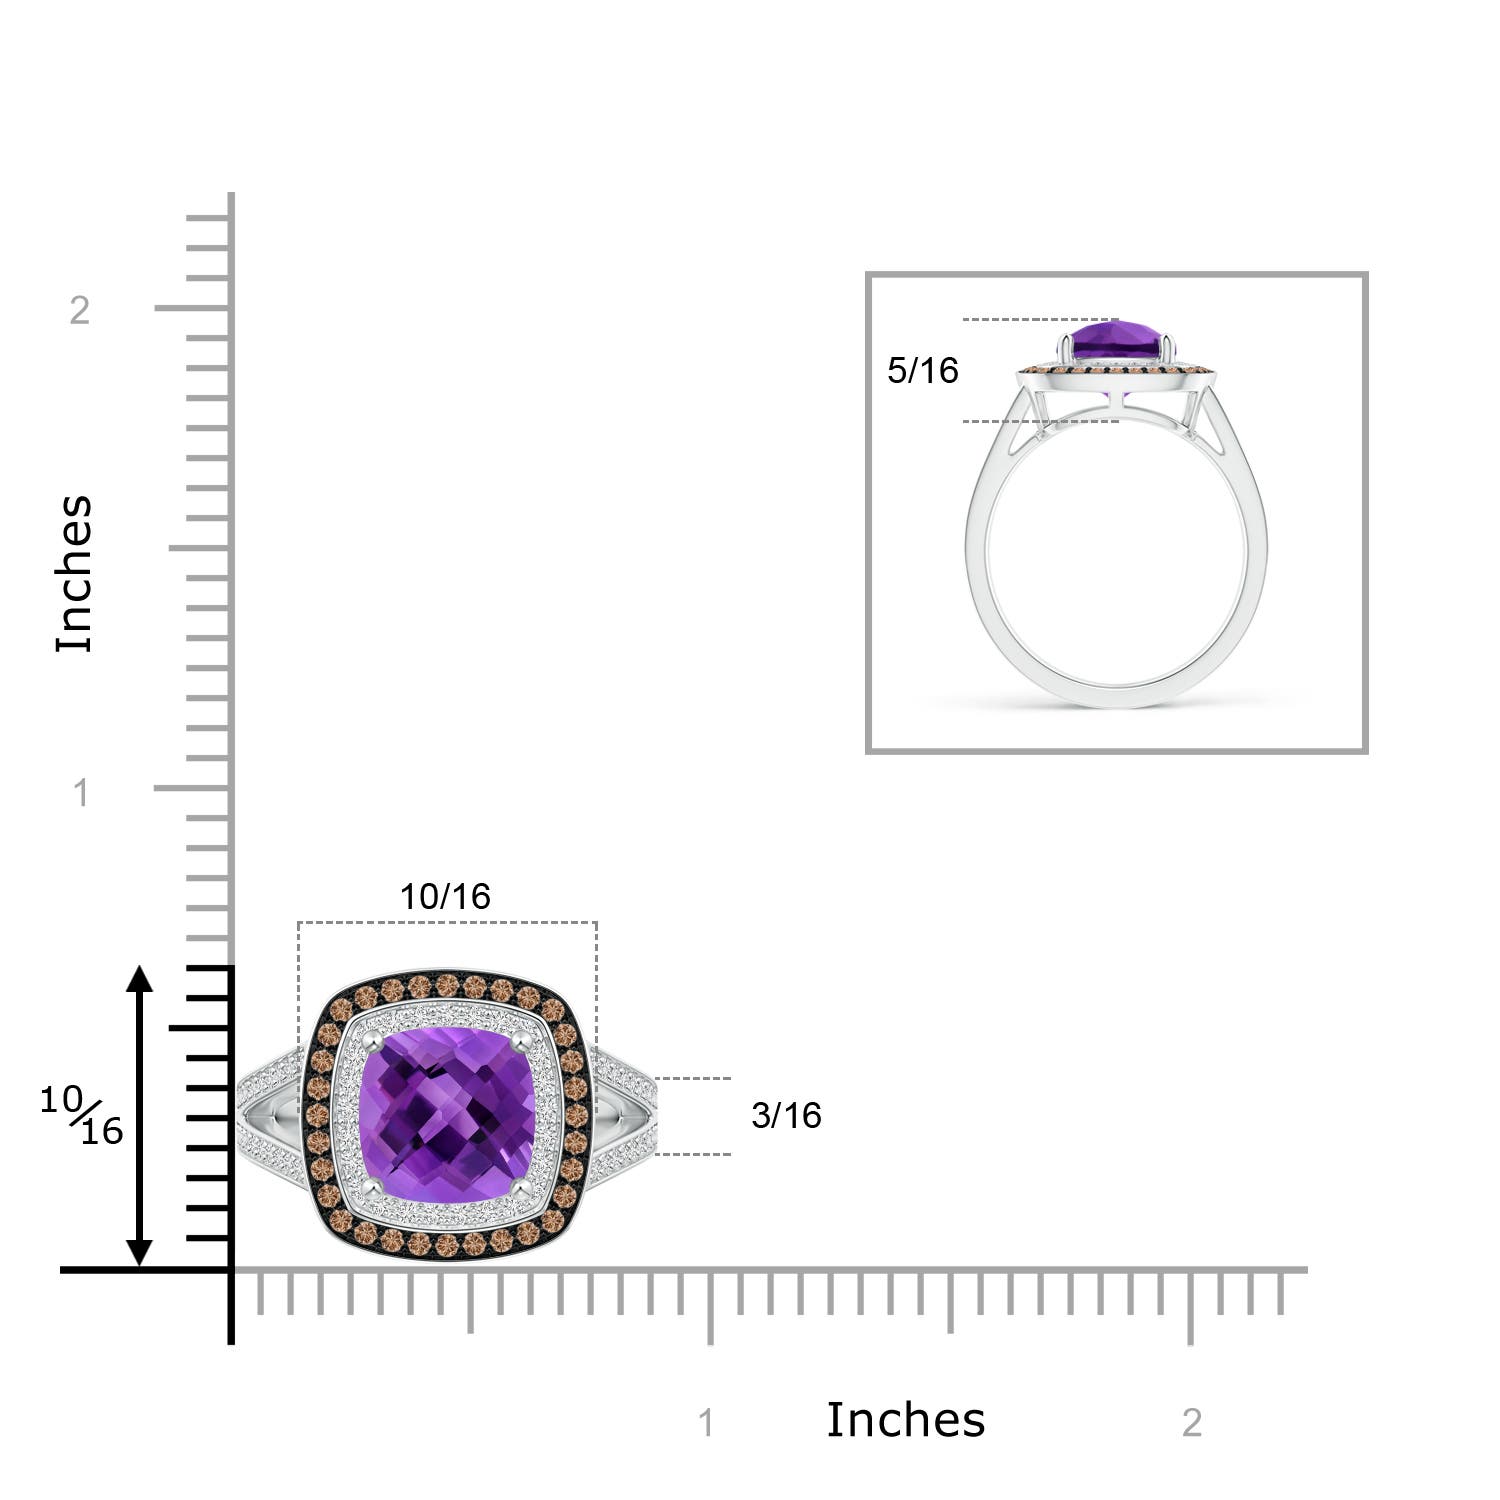 AAA - Amethyst / 3.7 CT / 14 KT White Gold